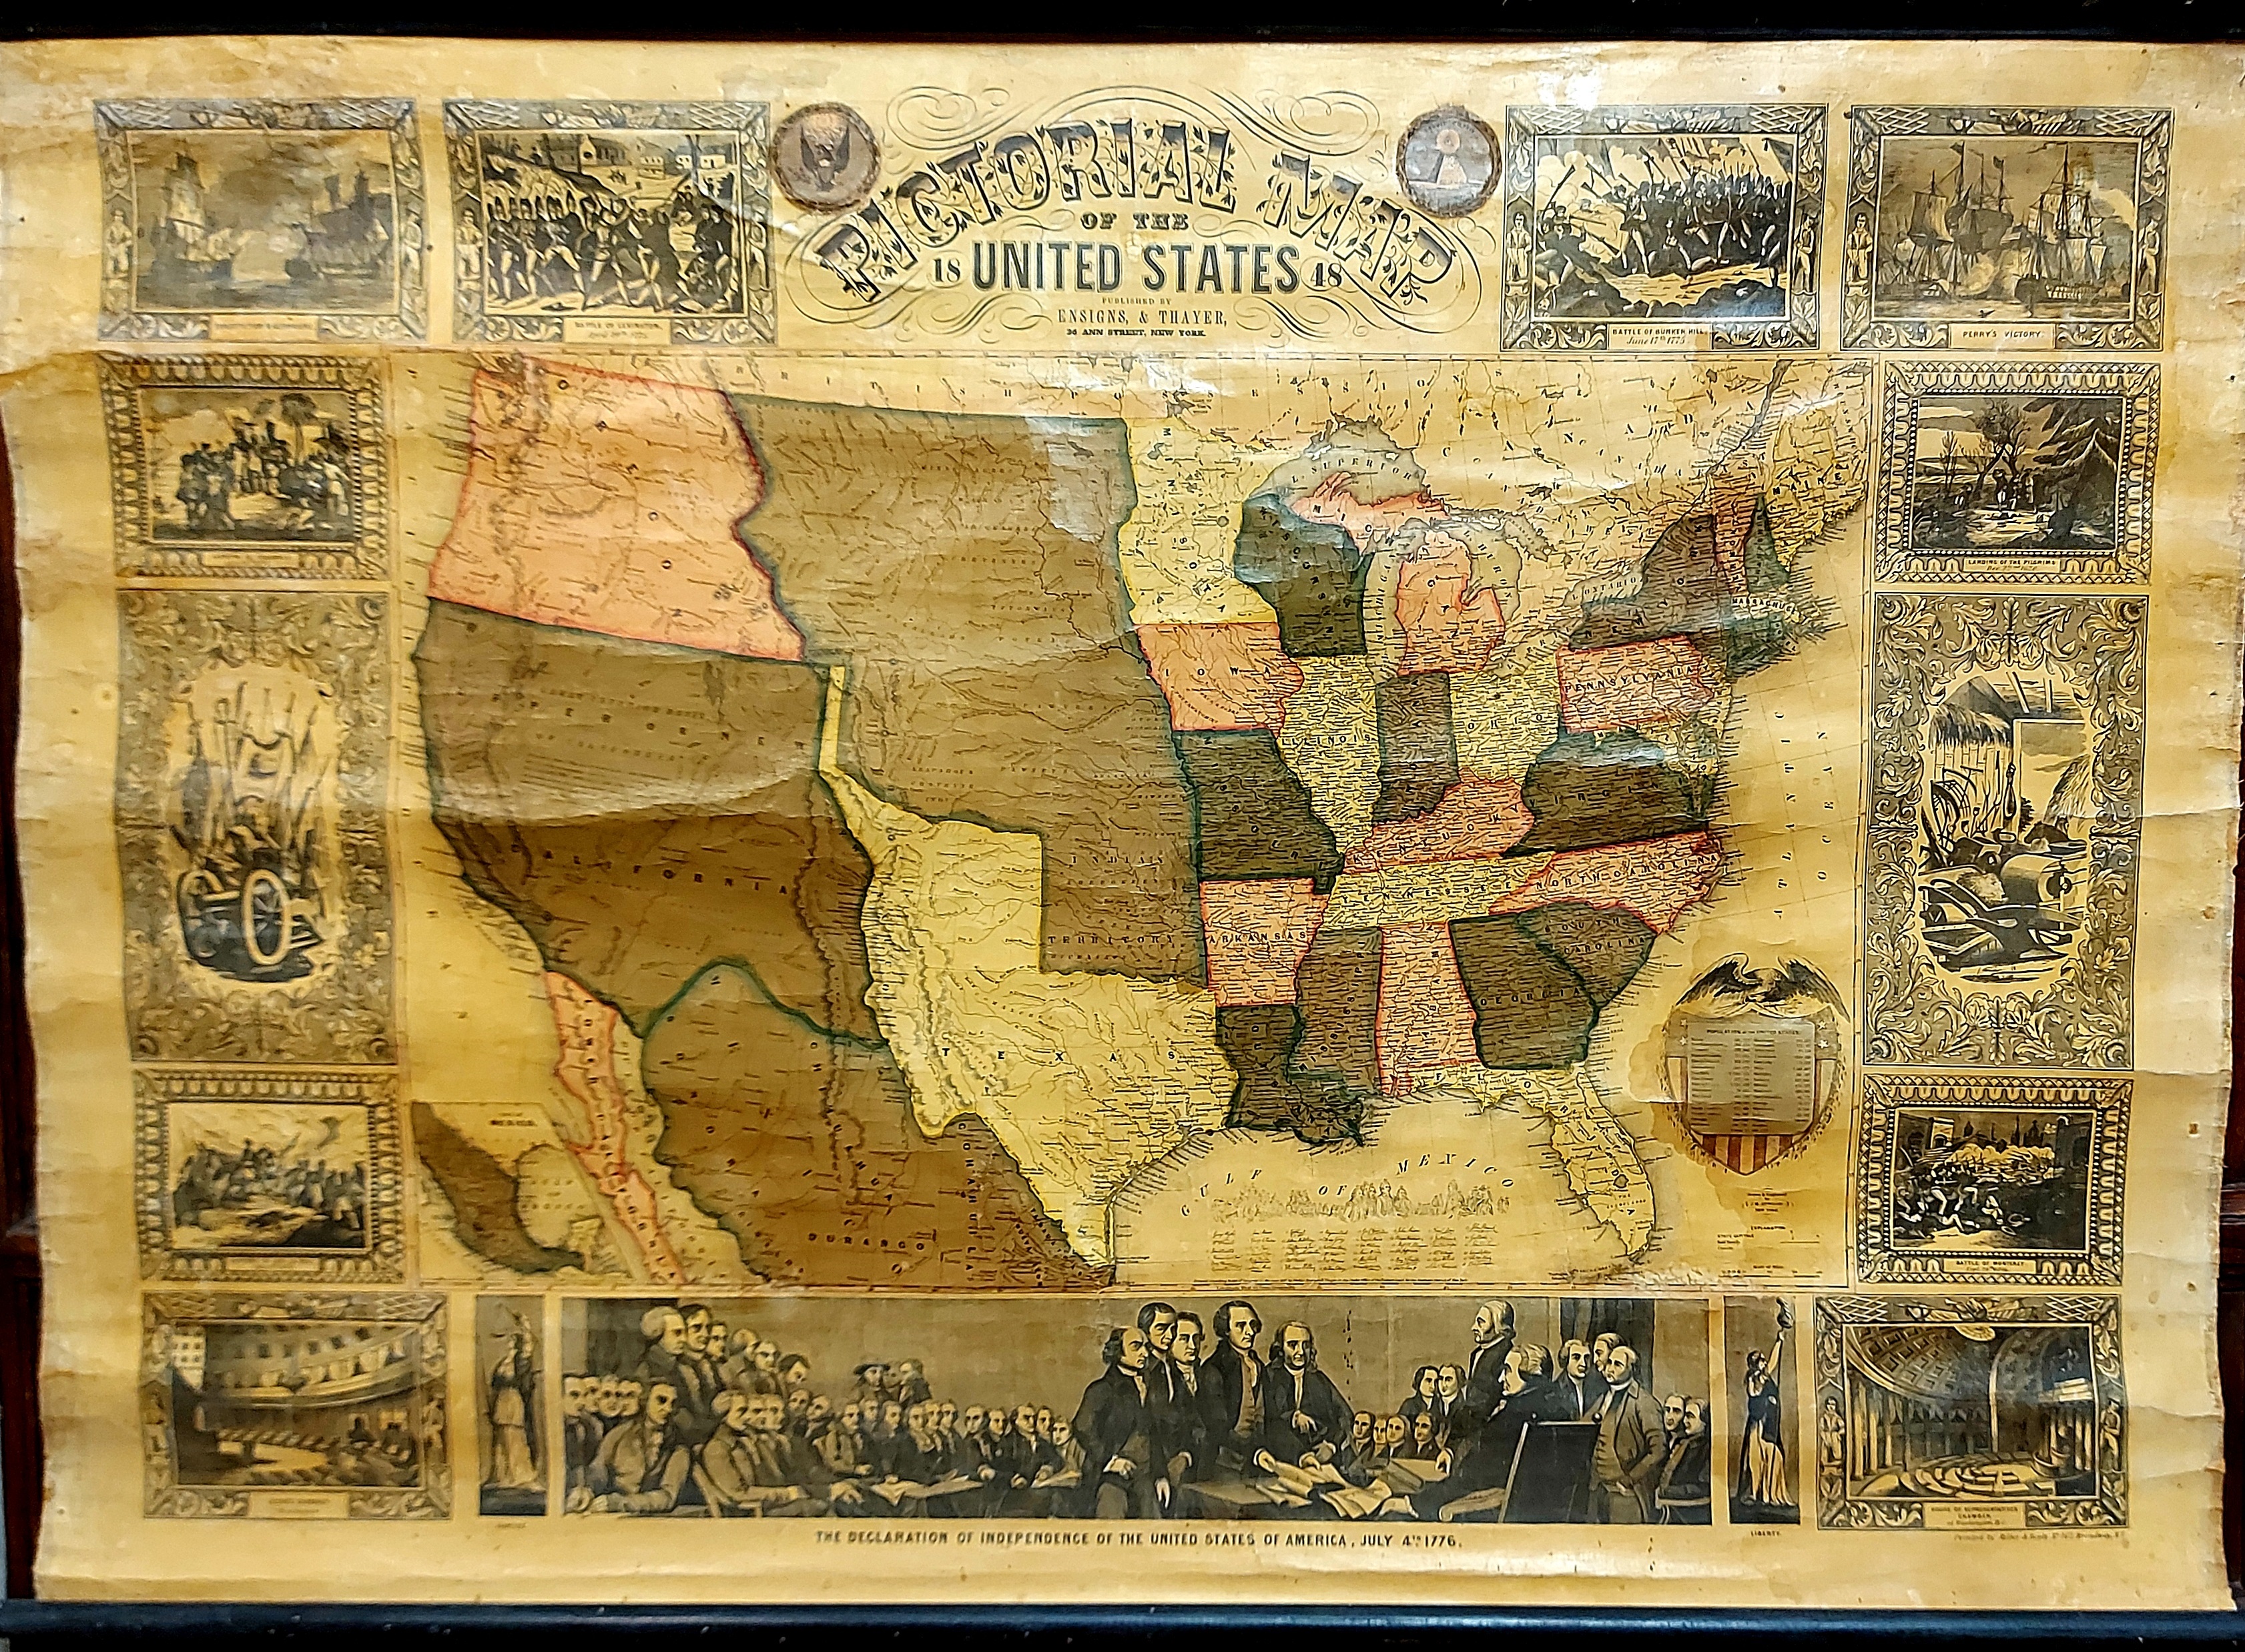 Pictorial Map of the United States published by Ensigns & Thayer